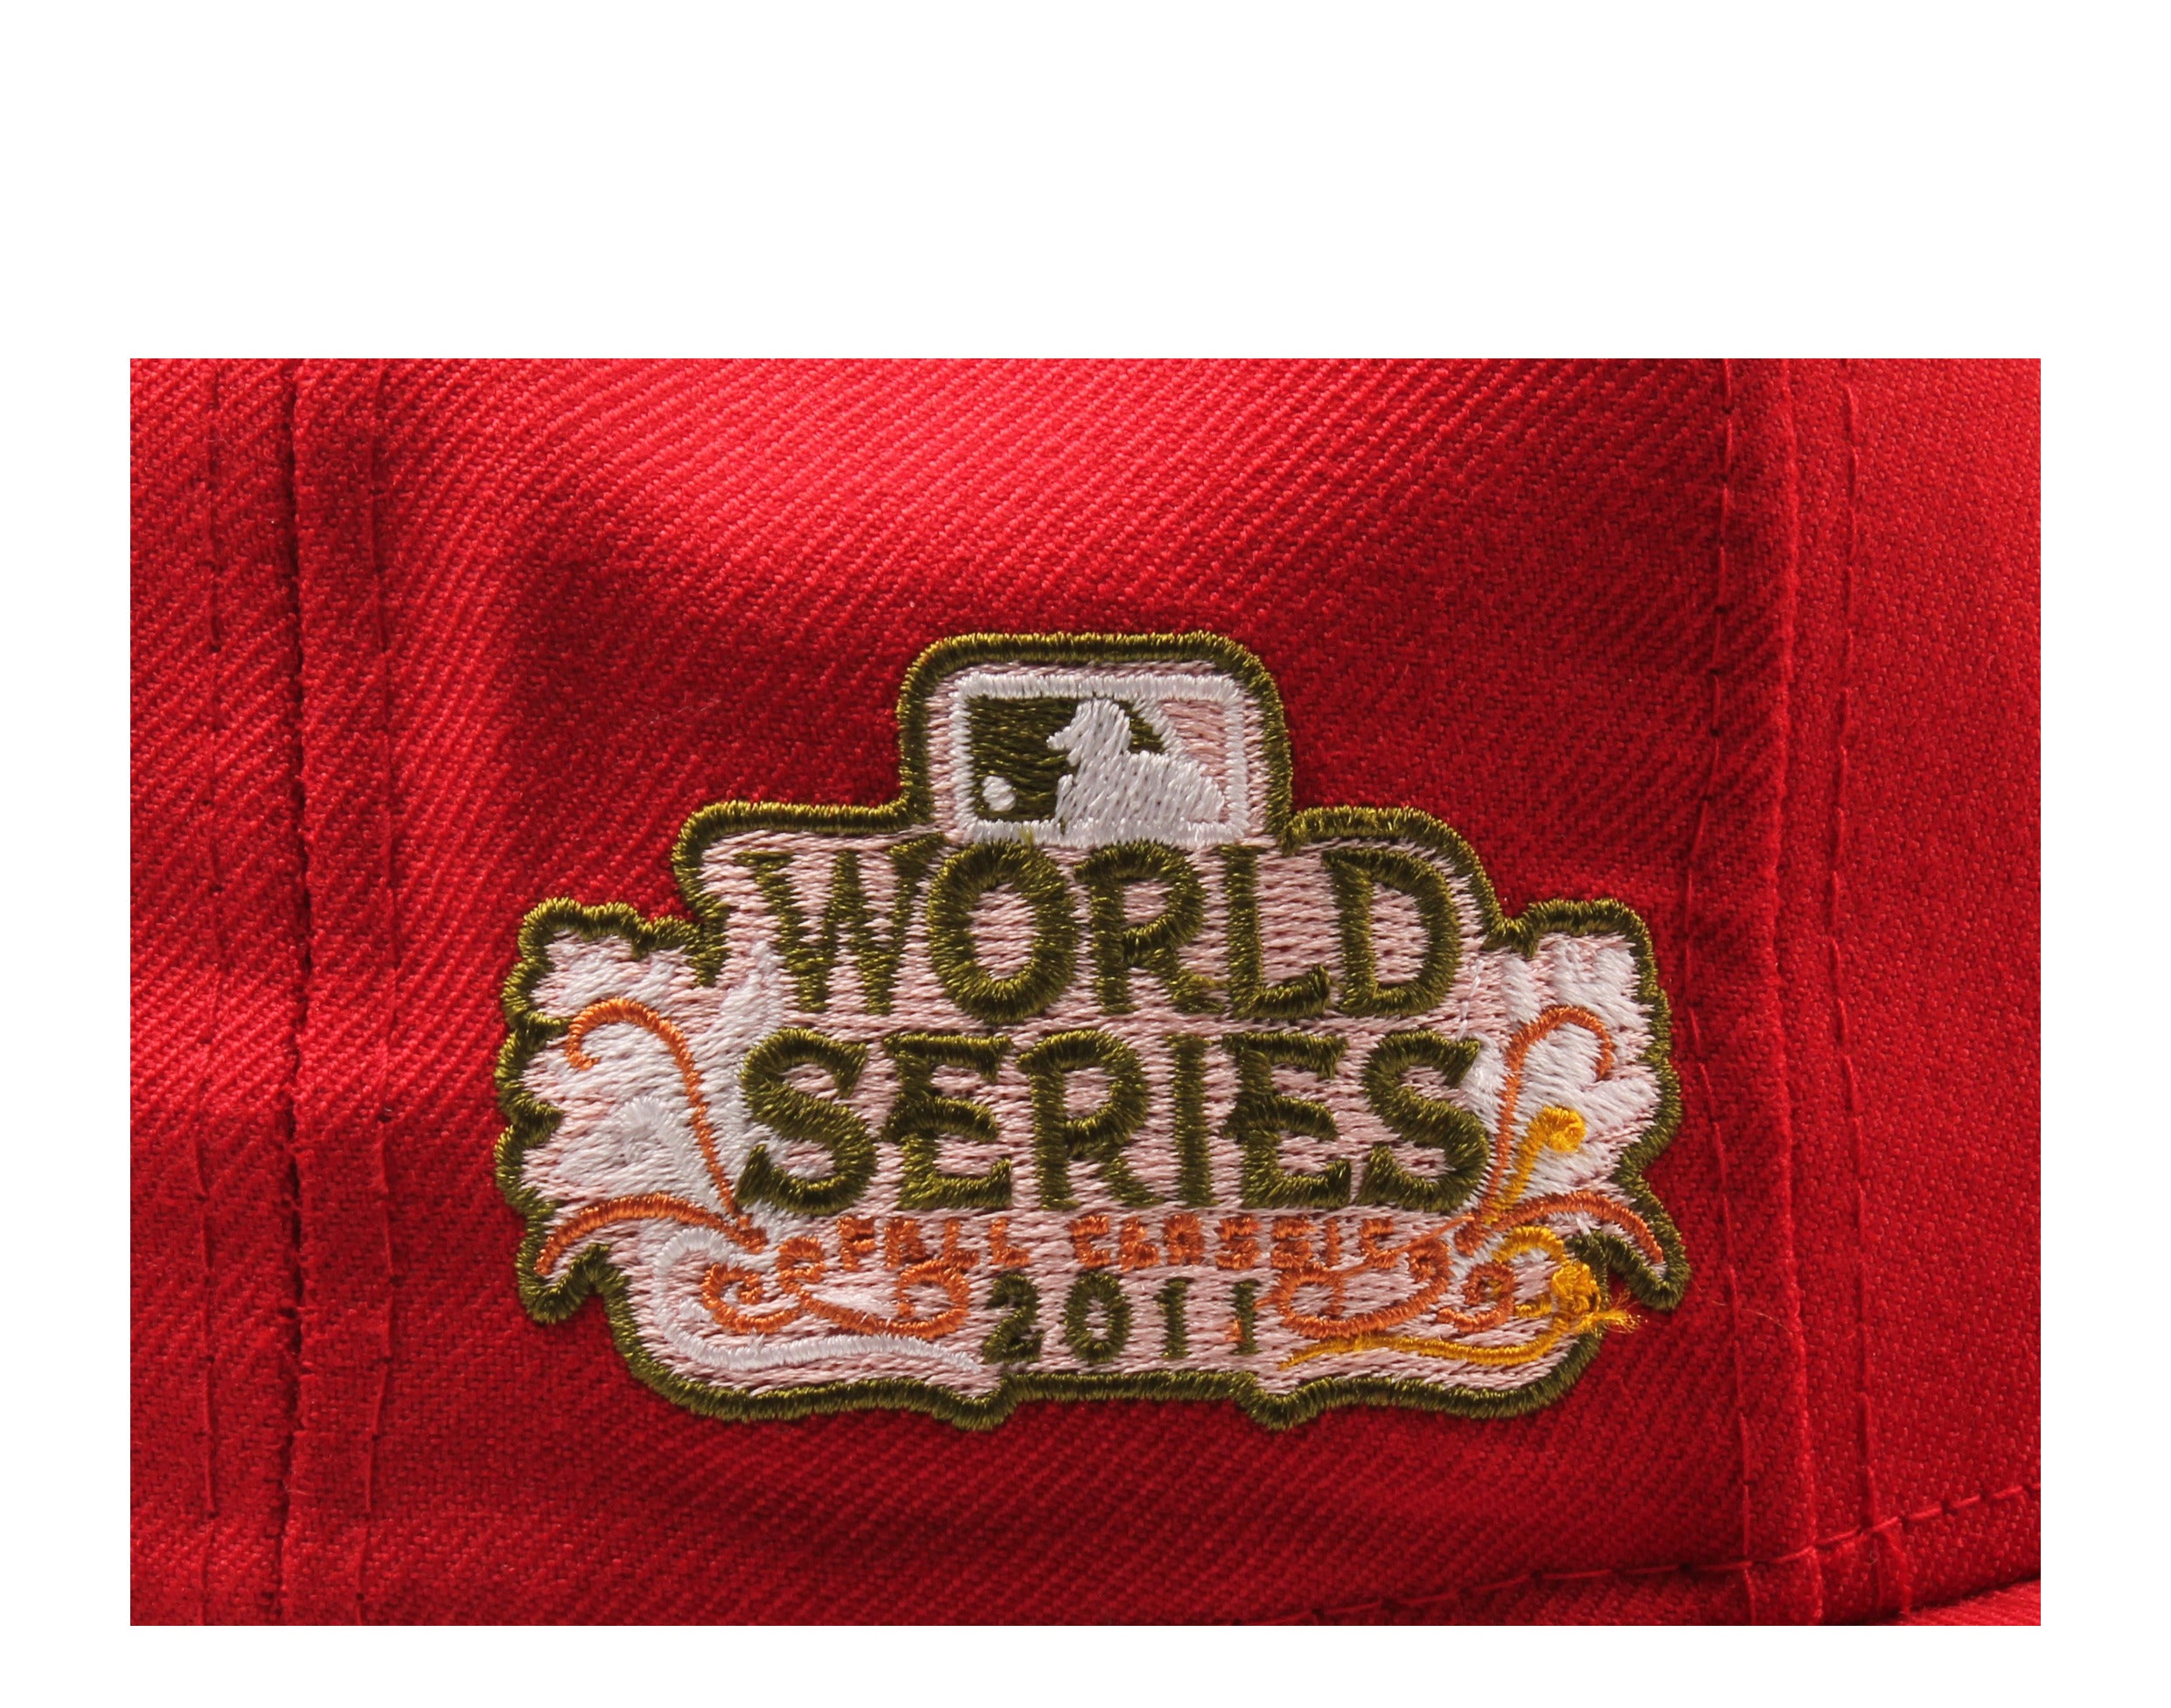 Men's St. Louis Cardinals New Era Pink/Sky Blue 2011 World Series  Cooperstown Collection Undervisor 59FIFTY